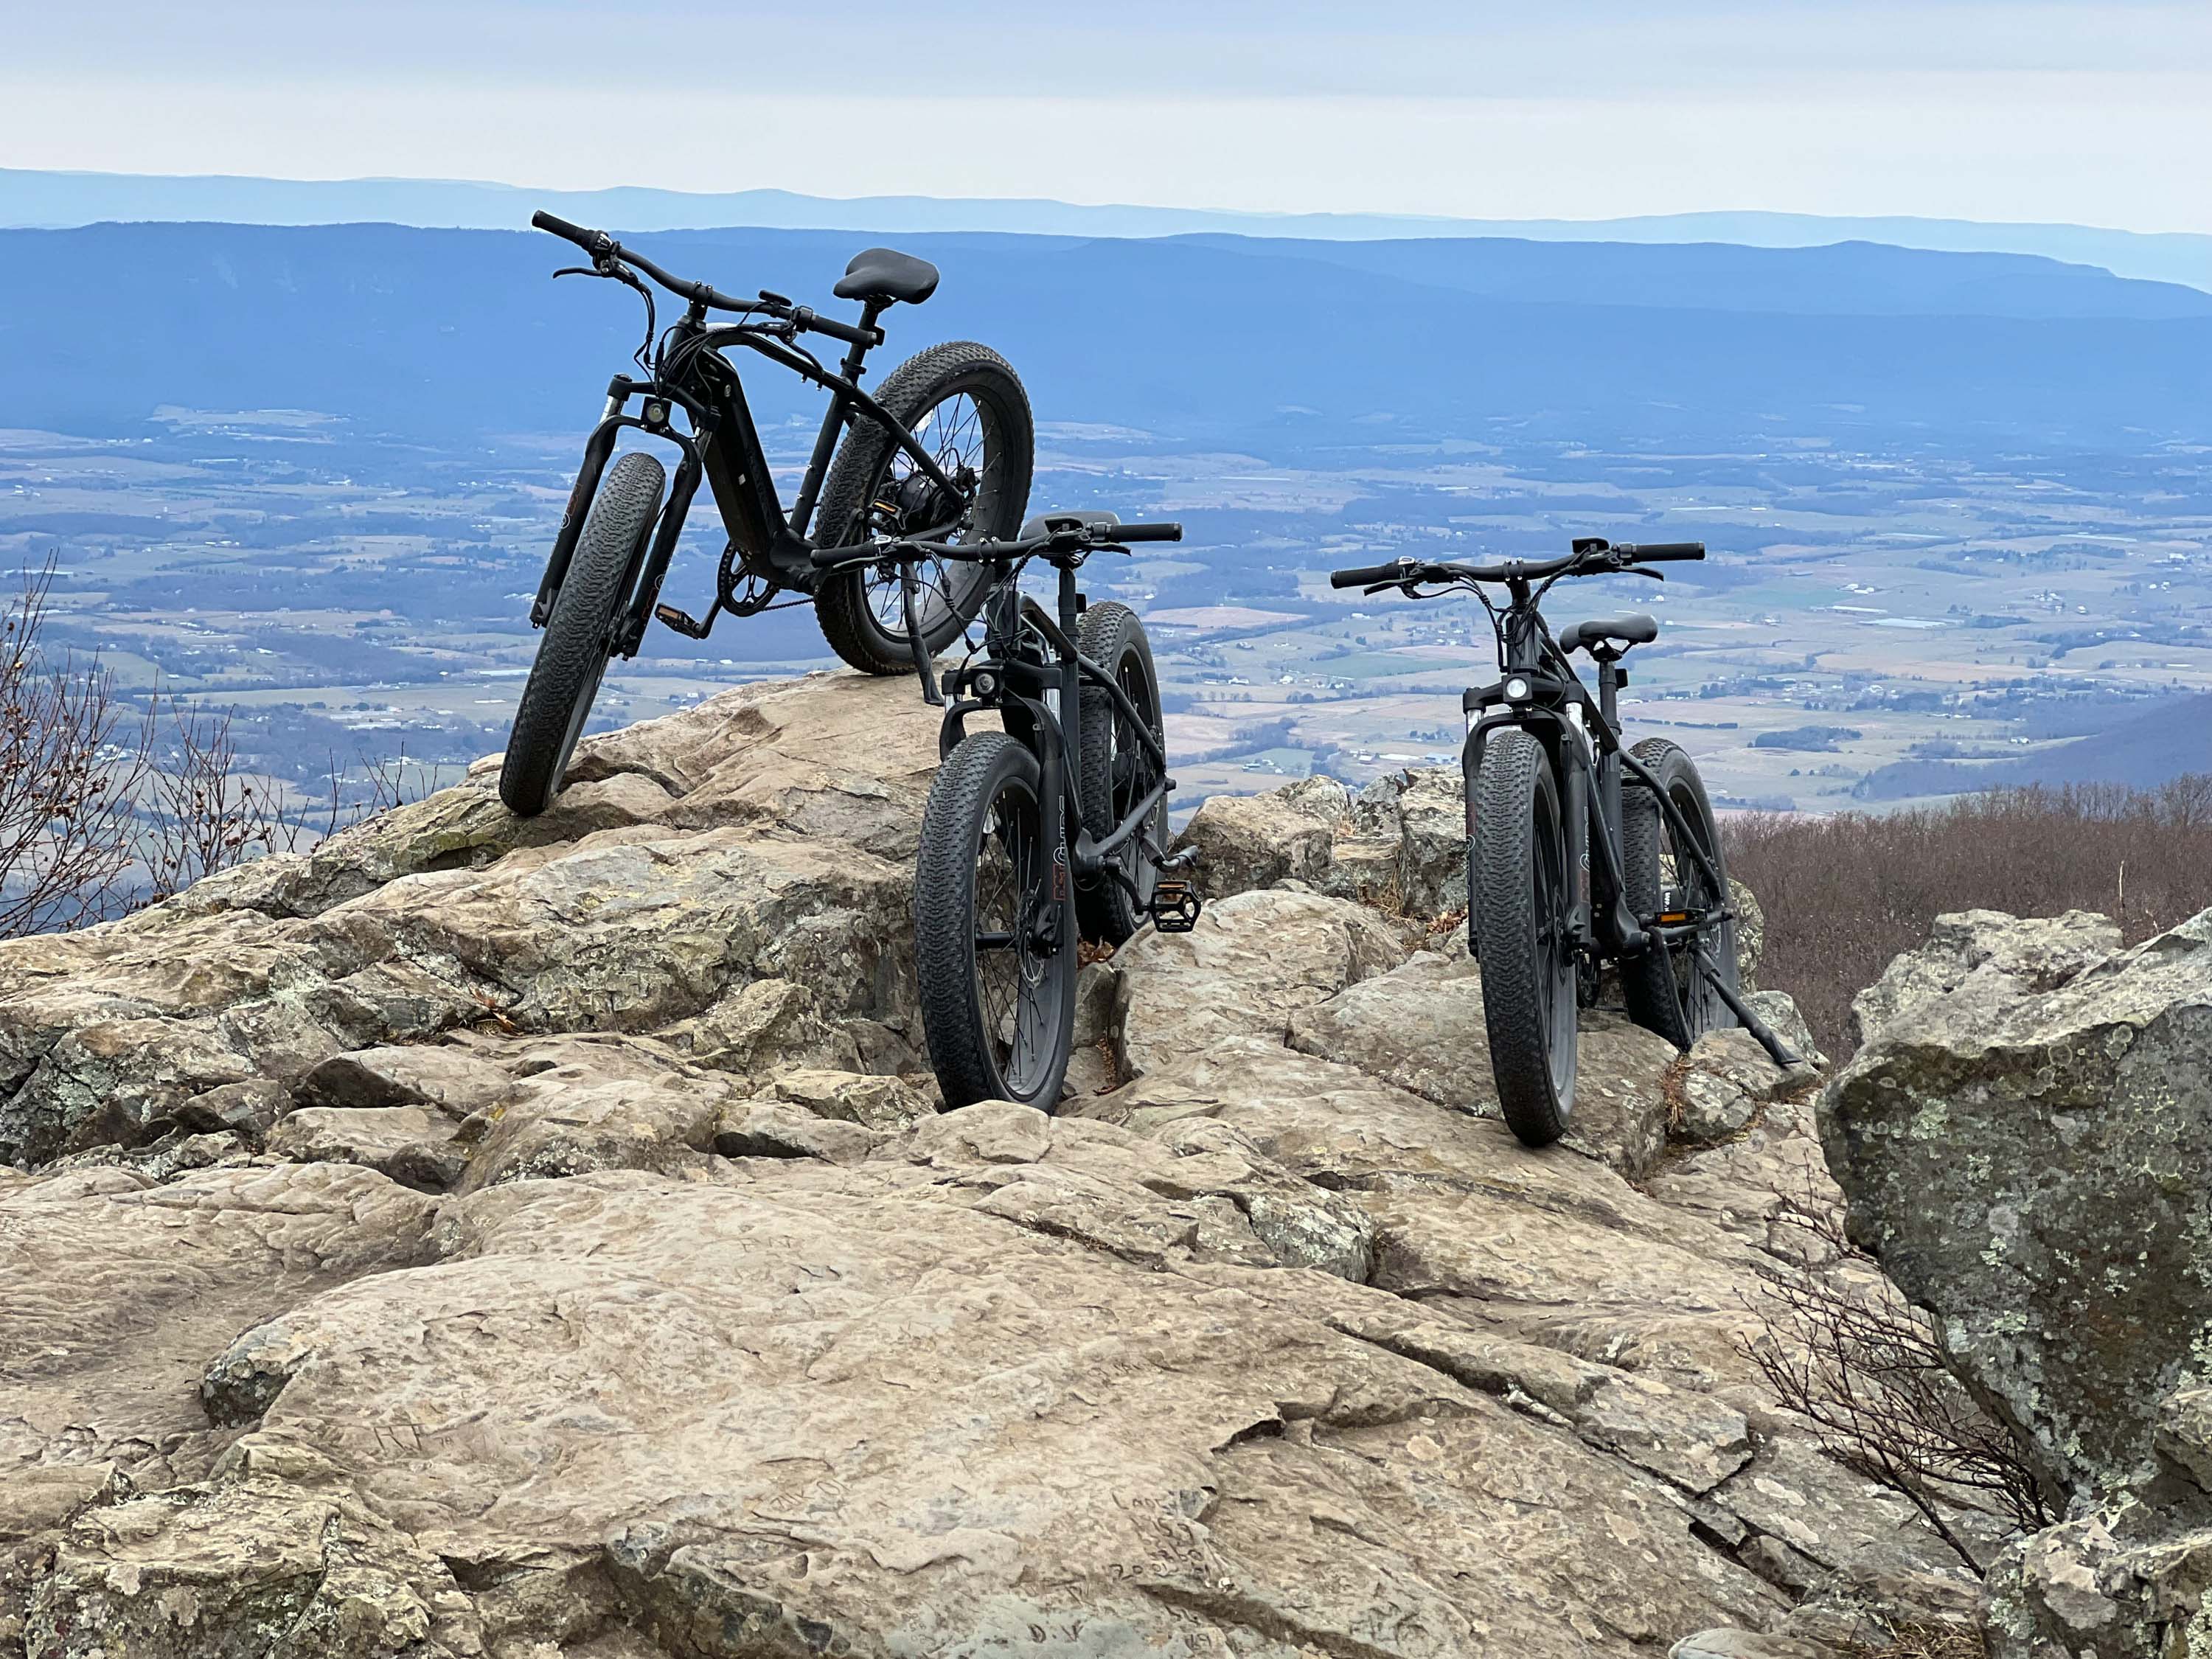 <span  class="uc_style_uc_tiles_grid_image_elementor_uc_items_attribute_title" style="color:#ffffff;">Powerful 750W E-Bikes for rent. You can reach Shenandoah National Park in 15minutes without much sweat and ride the Skyline Drive and trails for hours. All black and fat-tire</span>